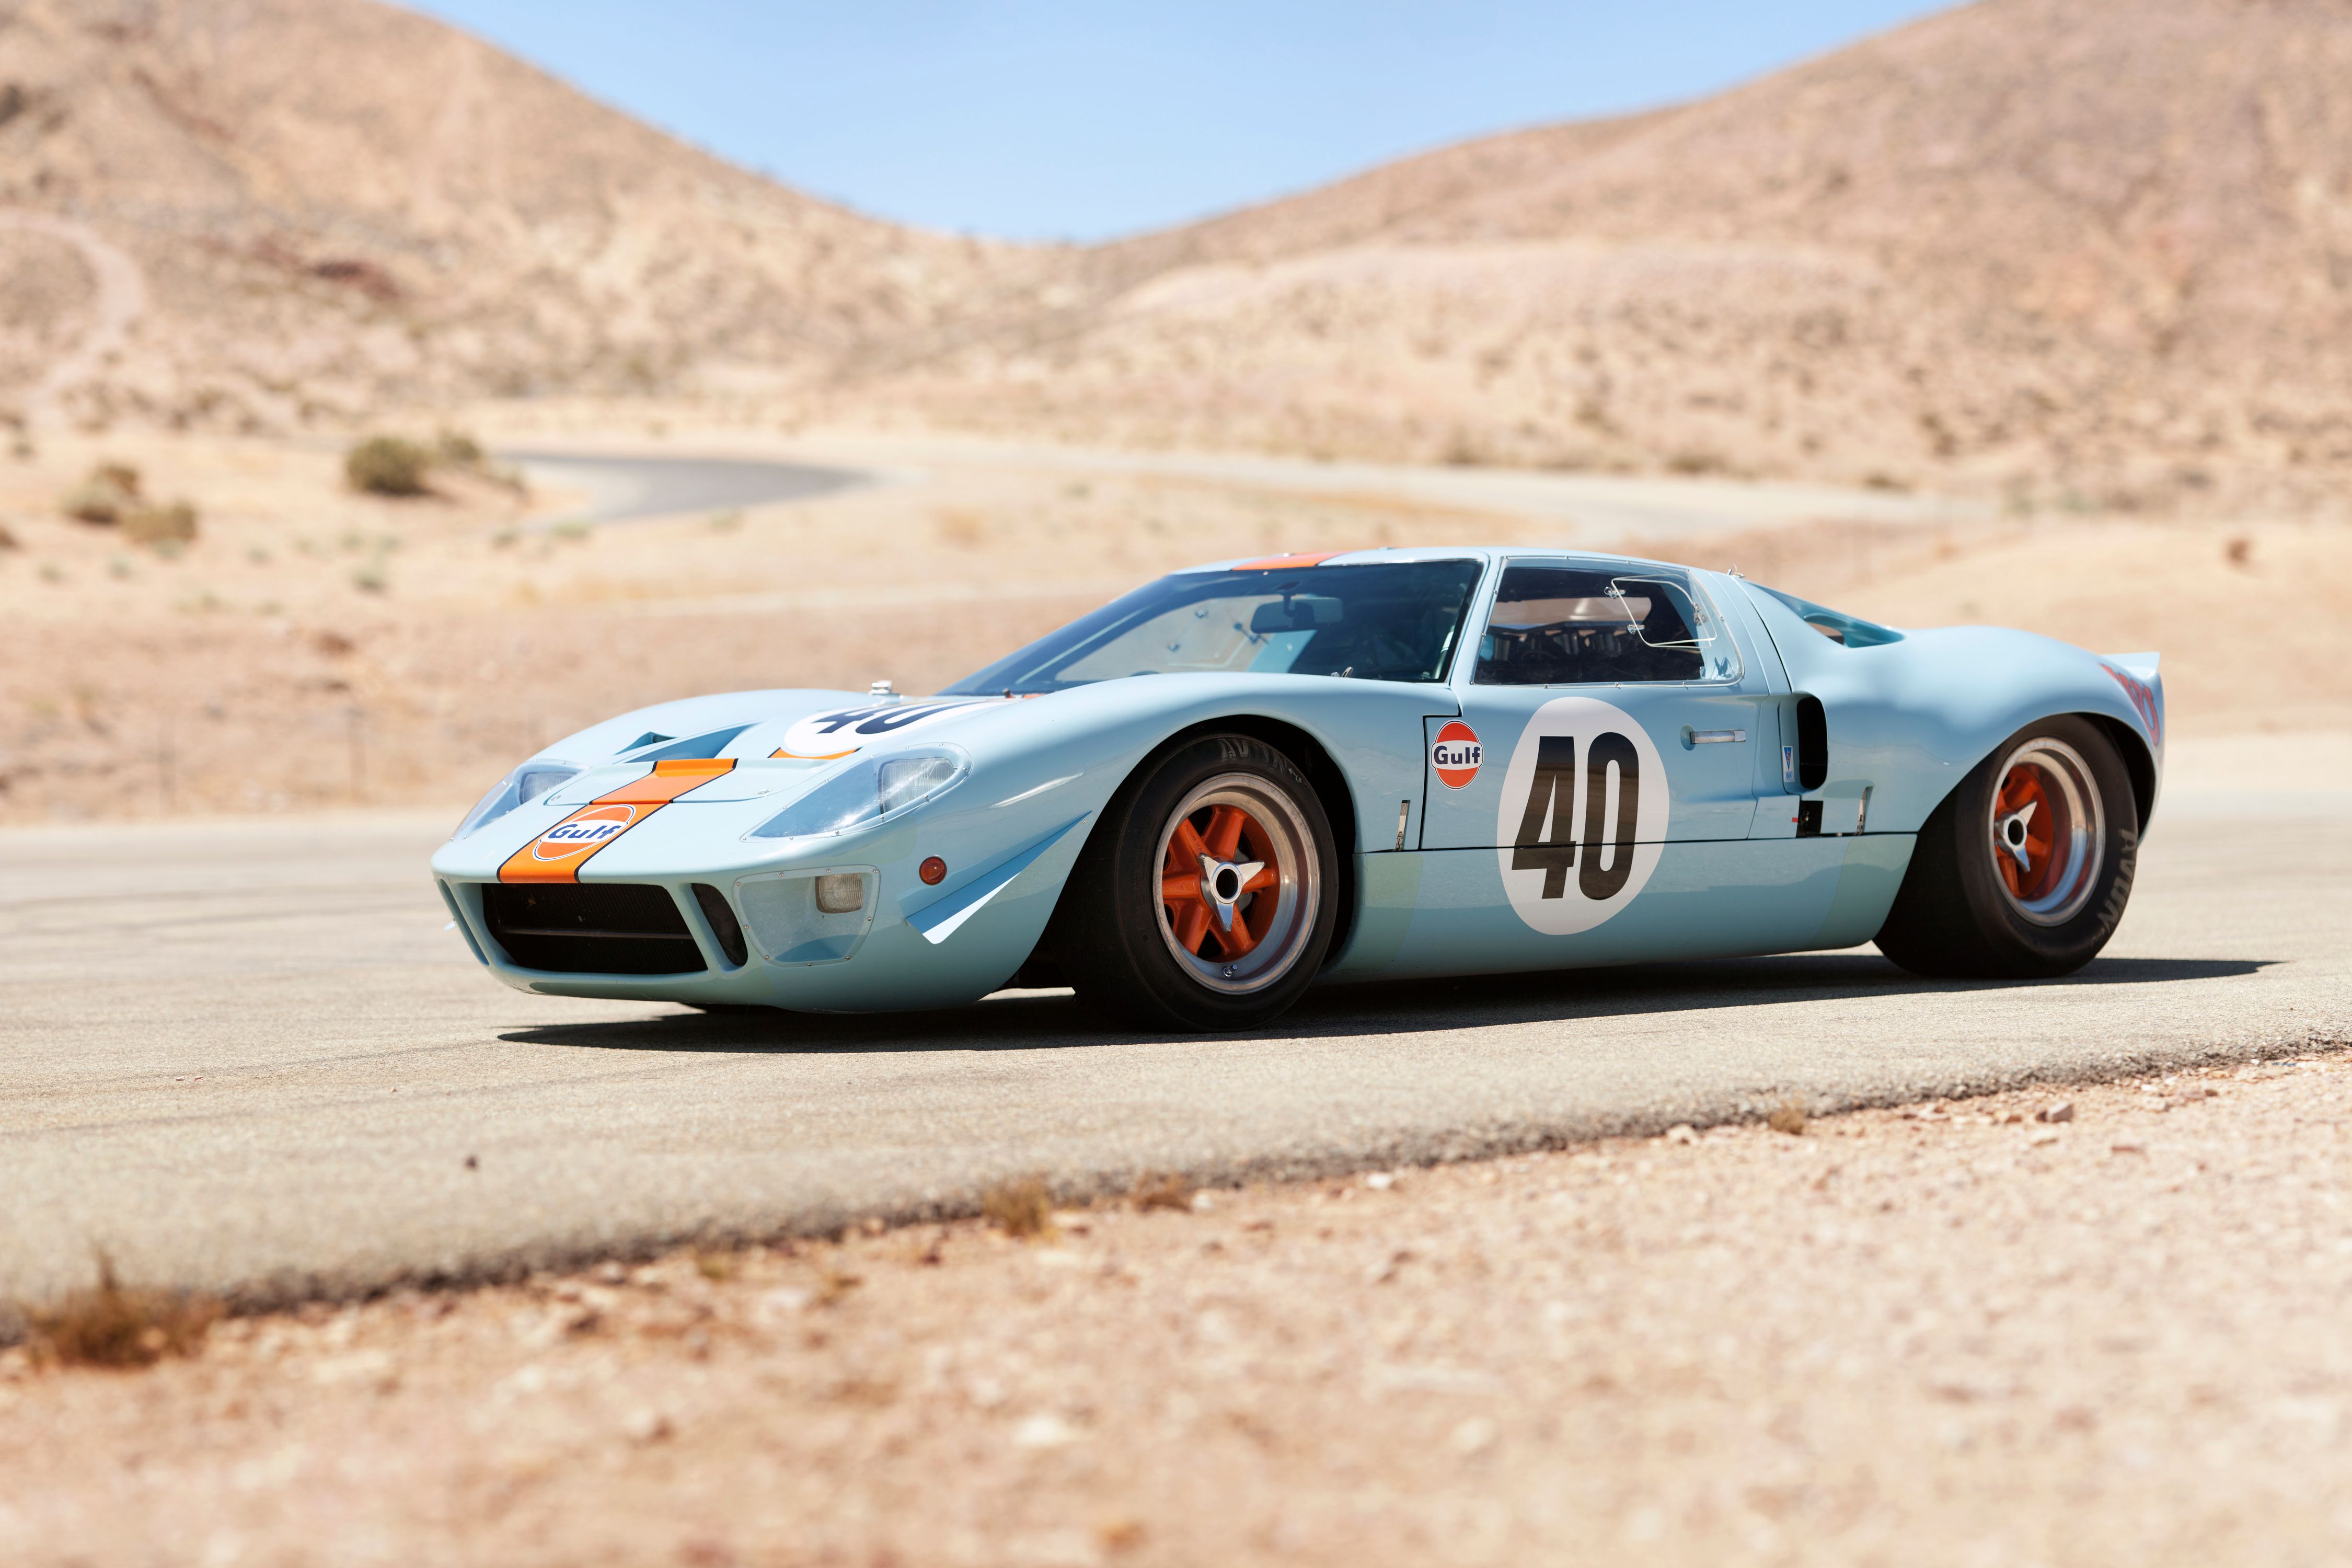 1966 Ford GT40 Mark II parked